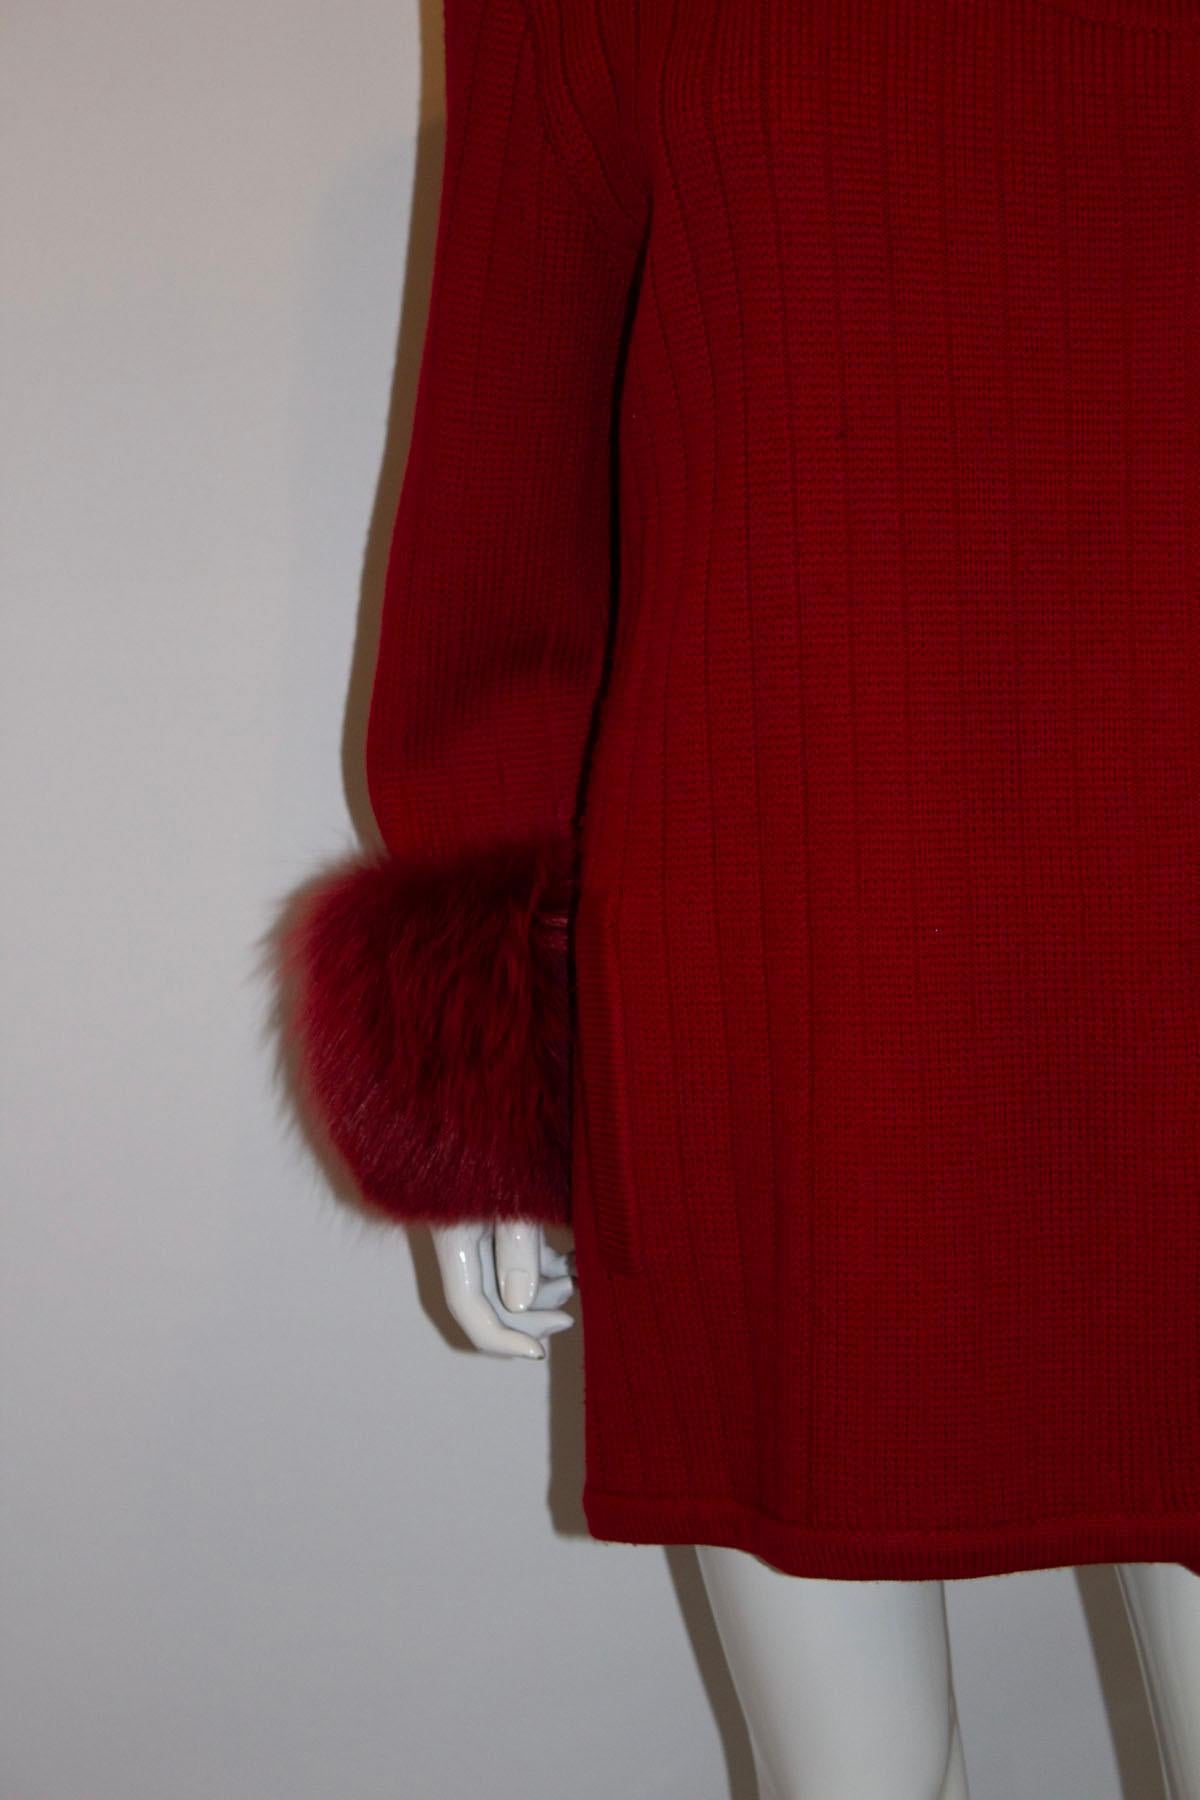 A headturning vintage red wool jacket by Harrods. In a  heavy wool knit, this jacket will keep you wonderfully warm and make a entrance. The red wool jacket is collarless, has large buttons , the original shoulder pads ( could be removed ) and red